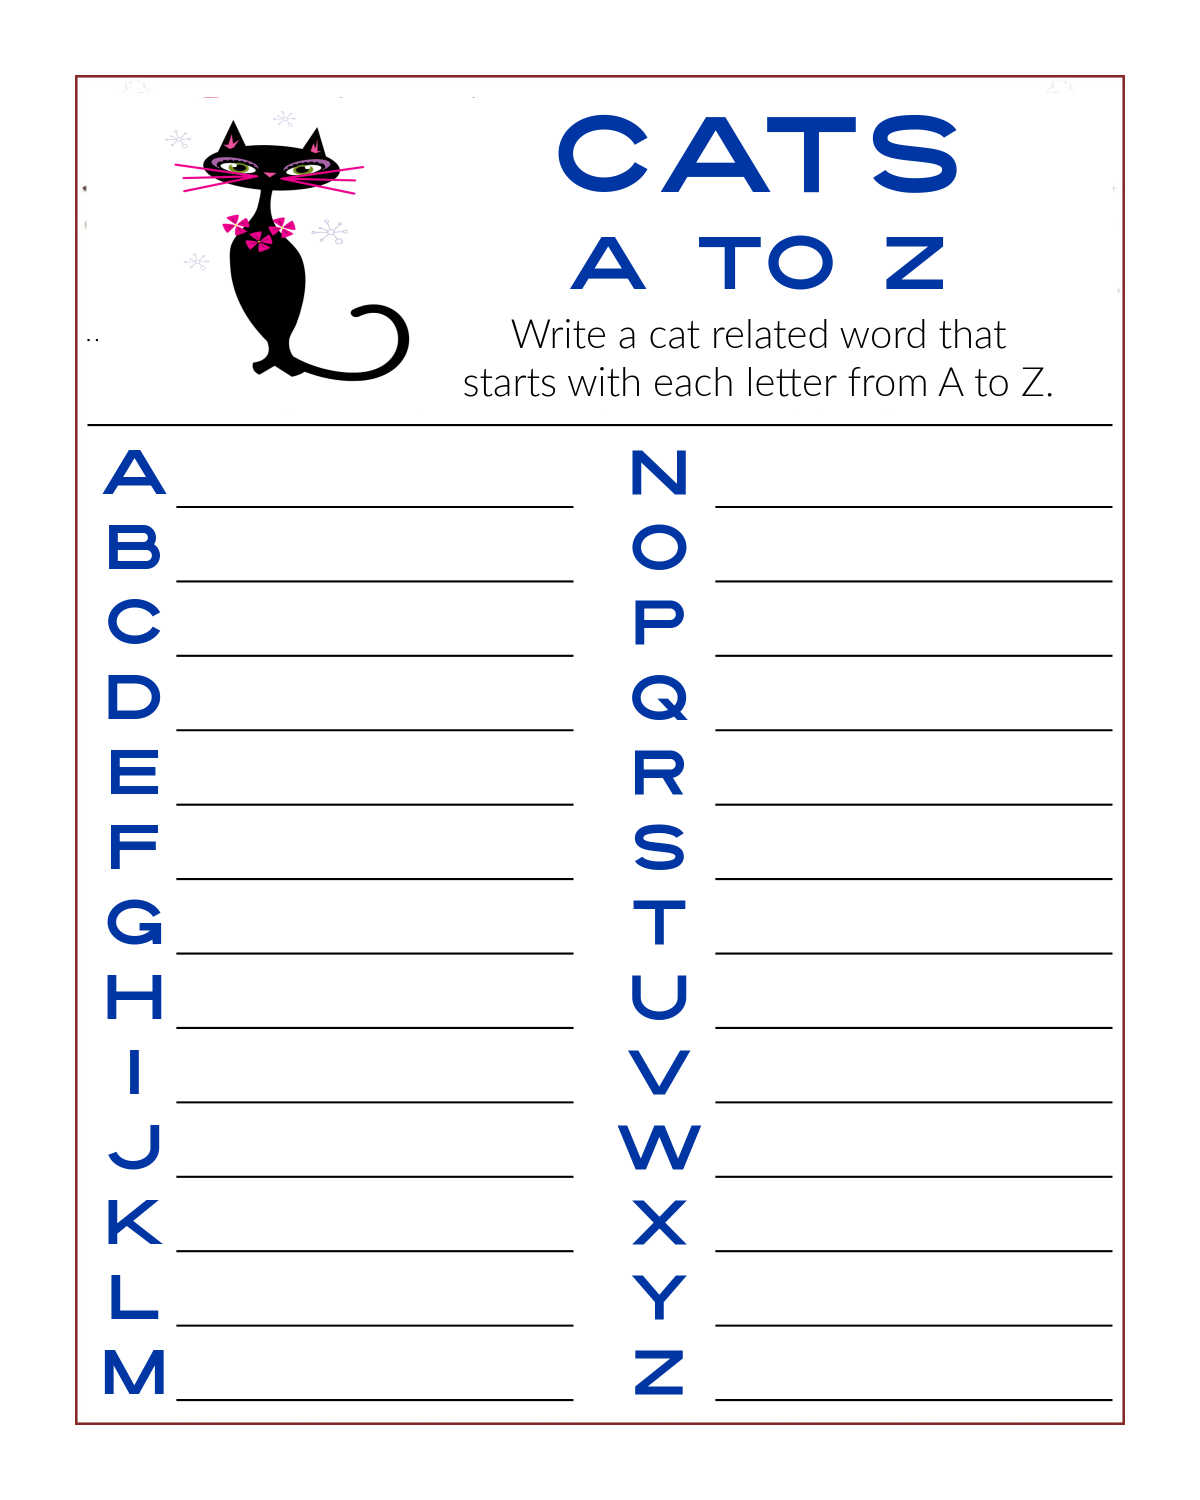 printable a to z cat word activity page